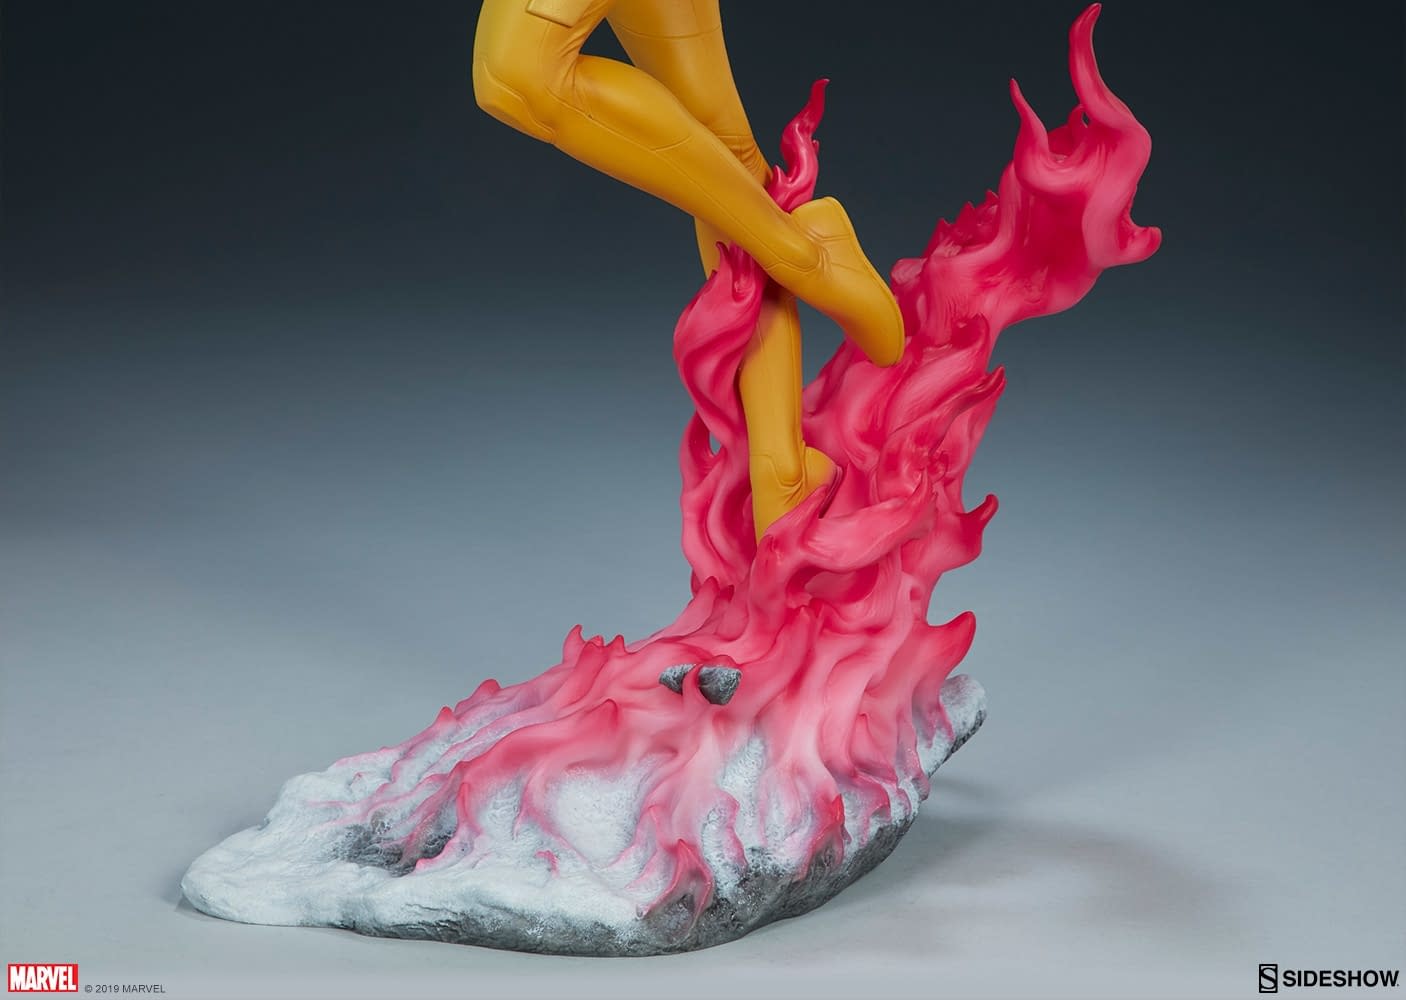 Jean Grey Gets a Premium Format Figure From Sideshow Collectibles